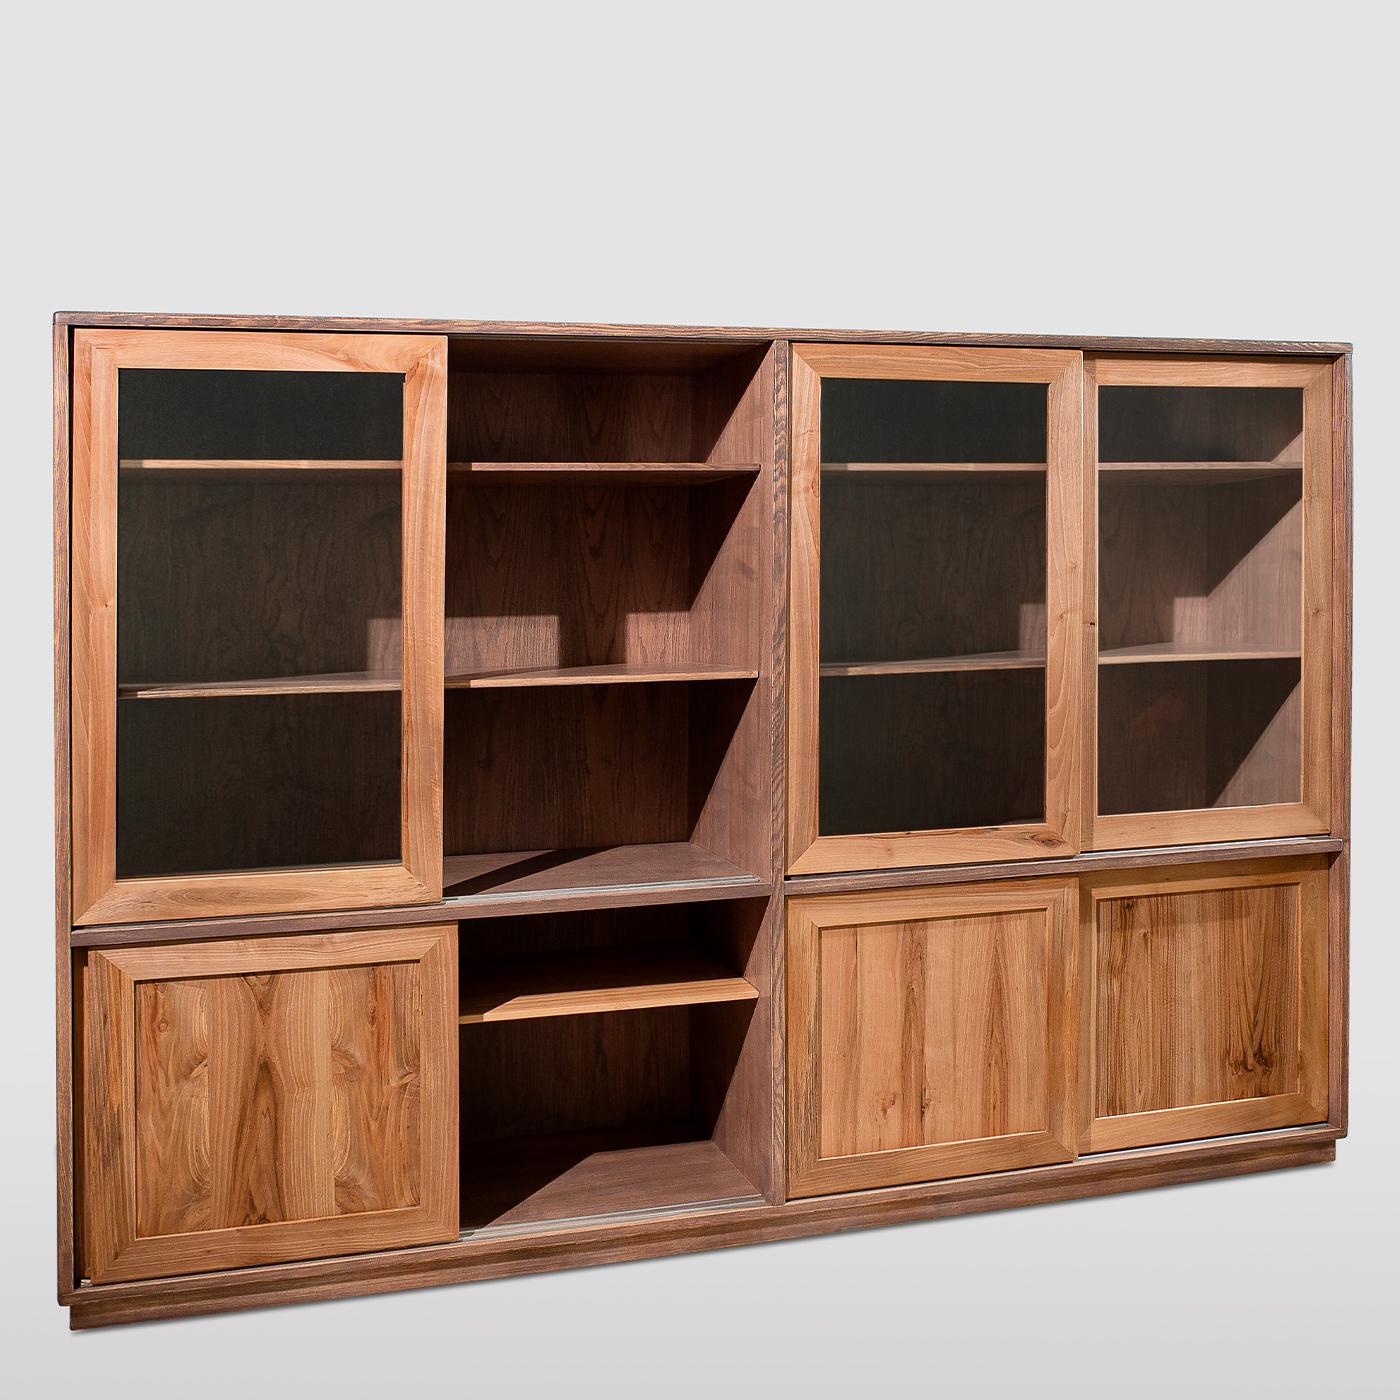 Refined cabinetry techniques meet elegant modern details in this clean-lined bookcase handcrafted from ash and solid walnut. The external shell is marked by a melange hue, while the interior and front doors boast a natural finish. Resting on a